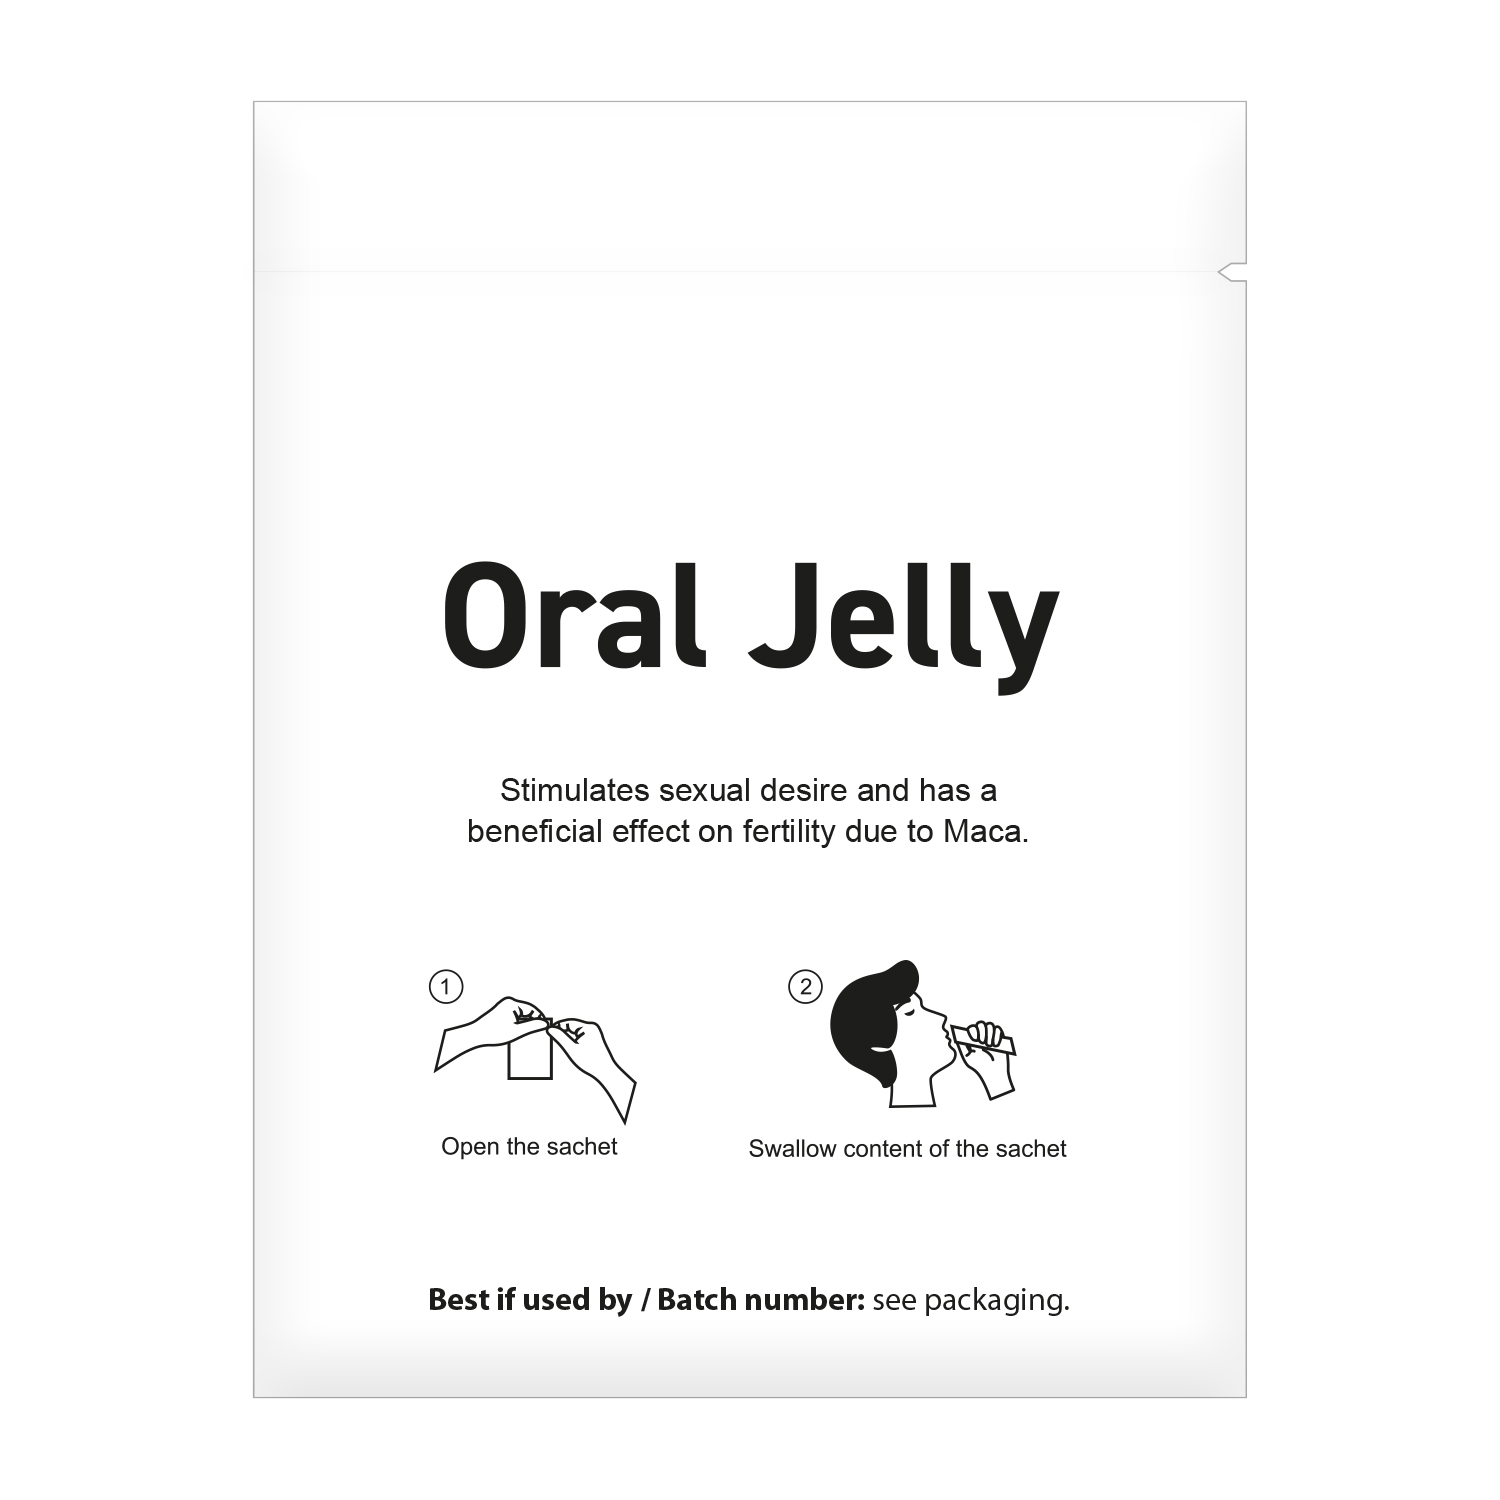 Oral Jelly
